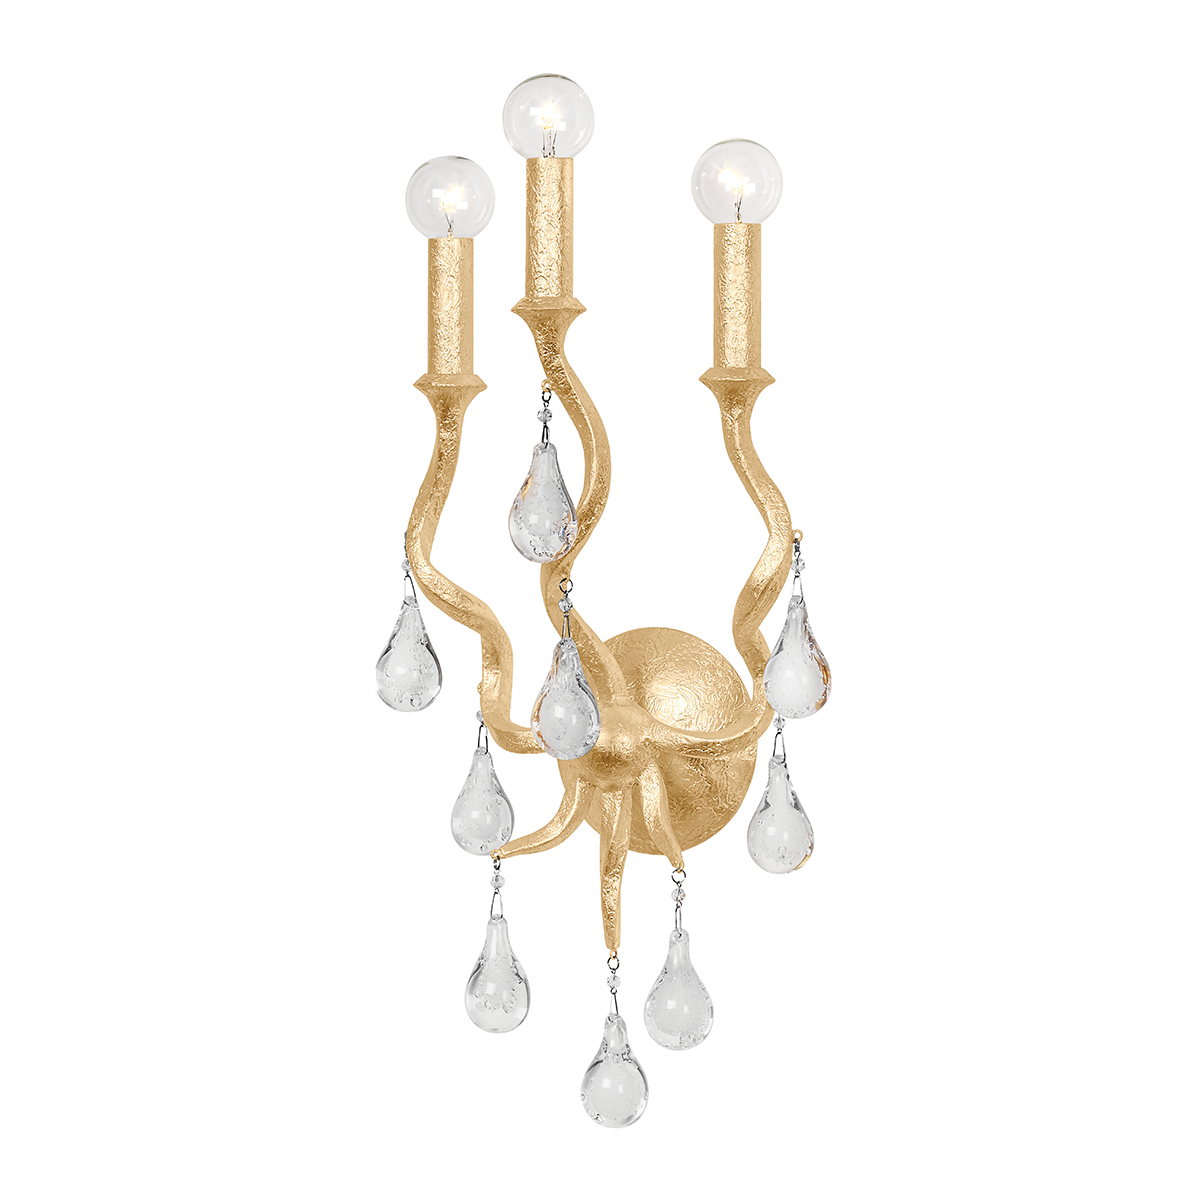 Steel Swirling Arms with Craquelle Crystal Drops Wall Sconce